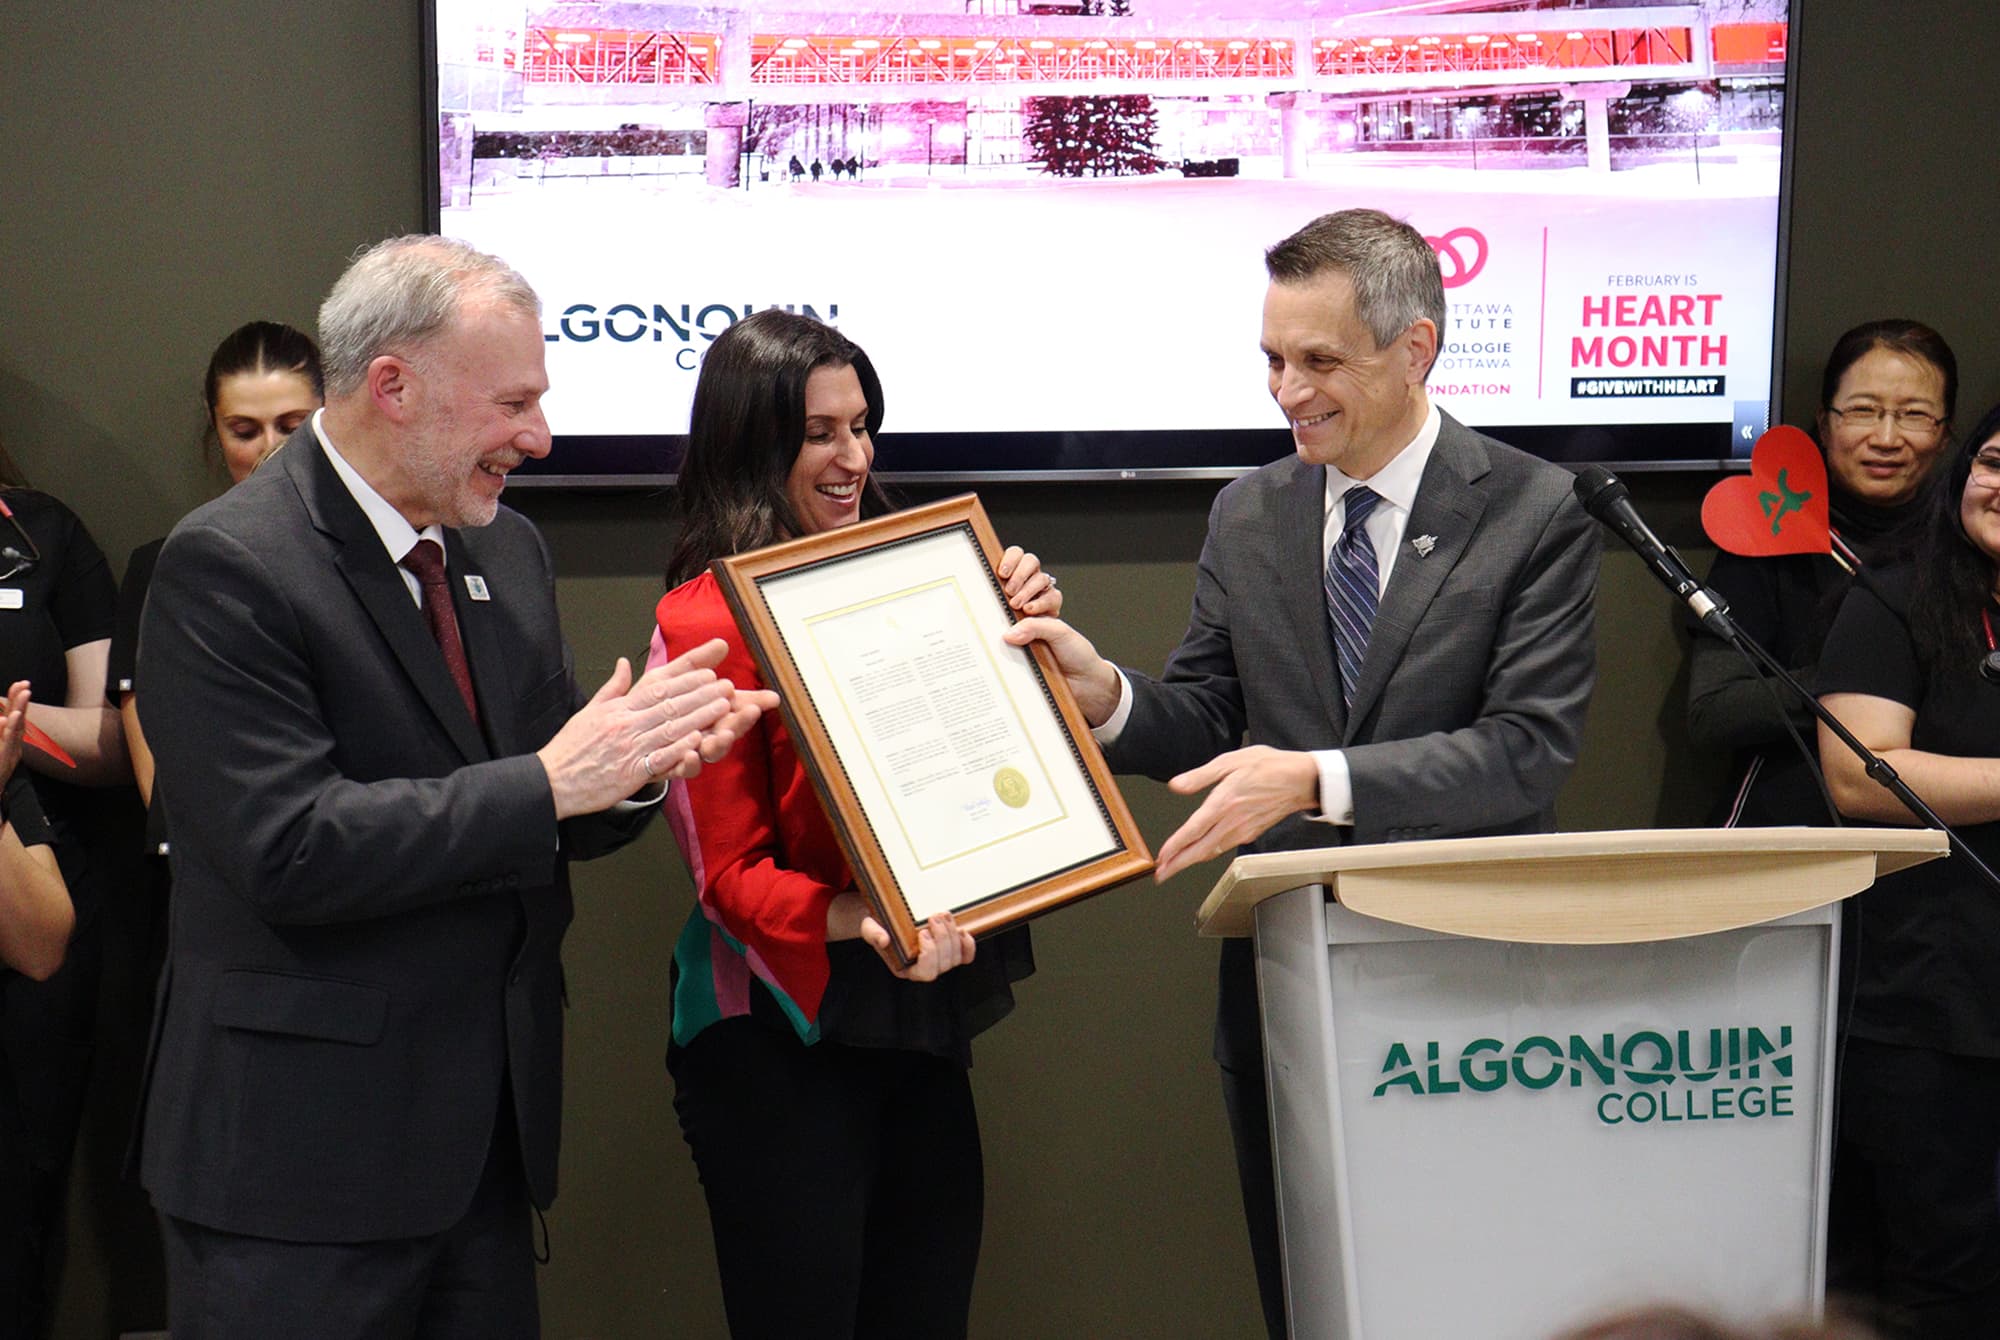 Mayor Mark Sutcliffe (right) presenting the official Heart Month proclamation to Claude Brulé (left) and Lianne Laing (middle).